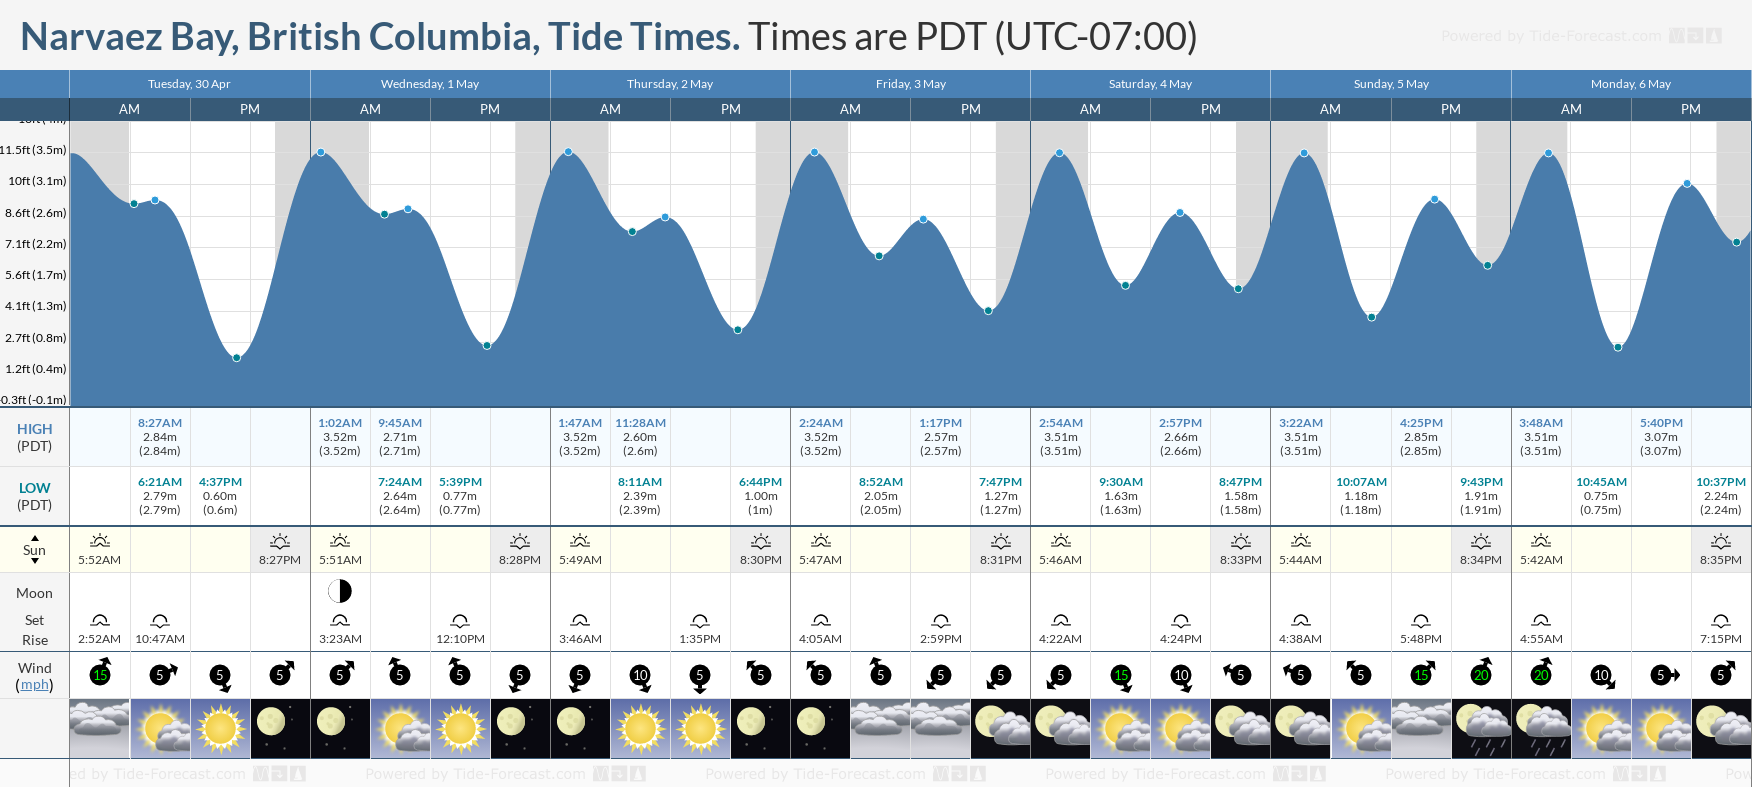 Narvaez Bay, British Columbia Tide Chart including high and low tide tide times for the next 7 days